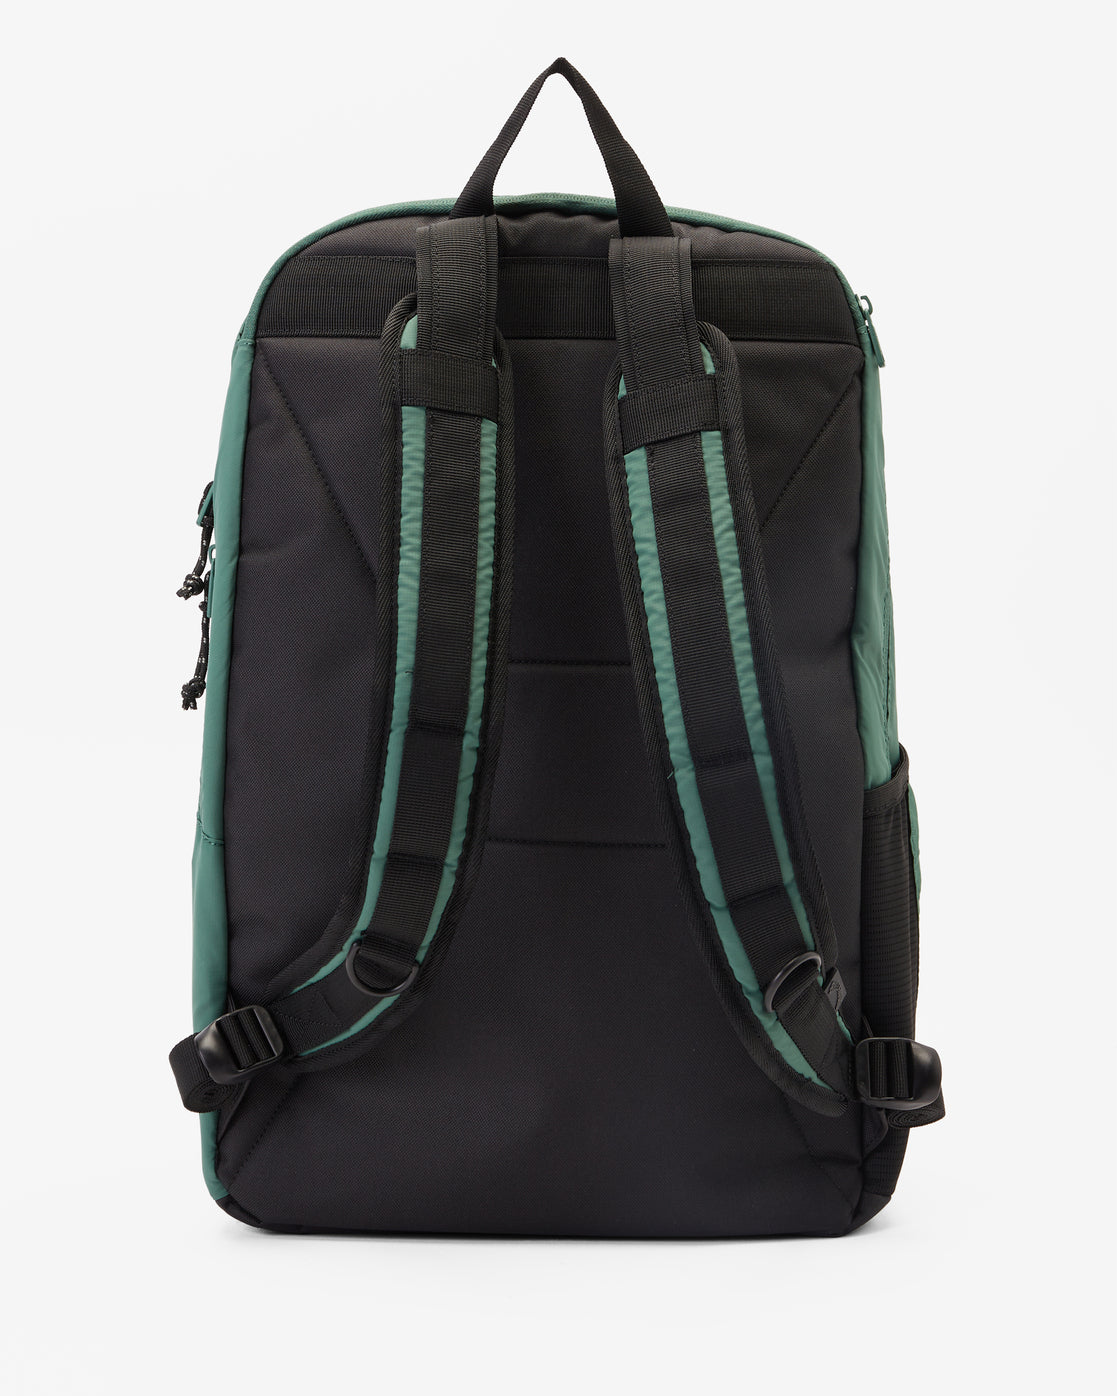 A/Div Axis Day Pack - EVERGREEN